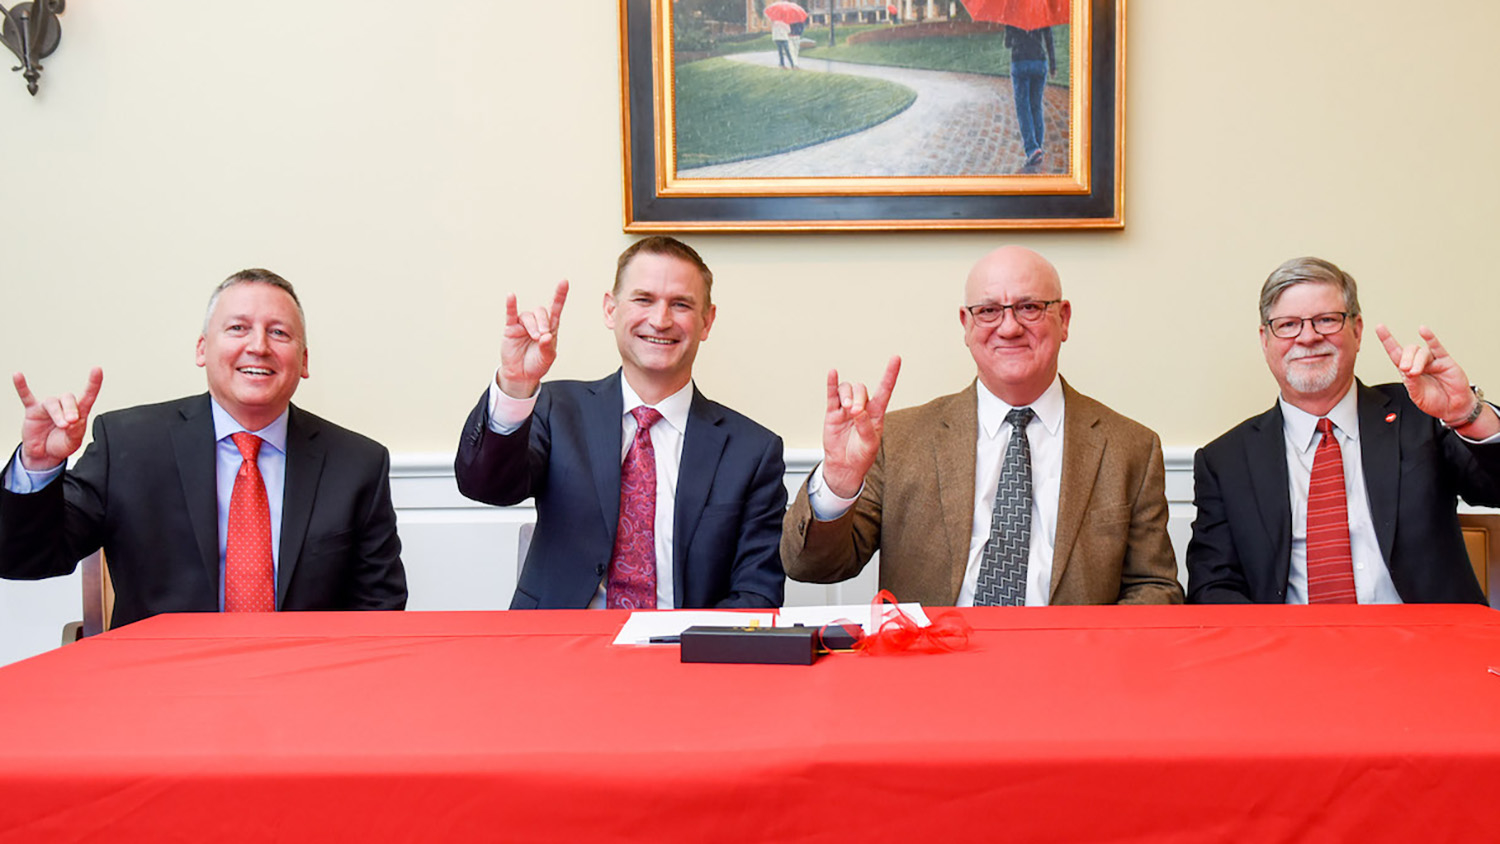 Four men at a red table give the wolf sign.